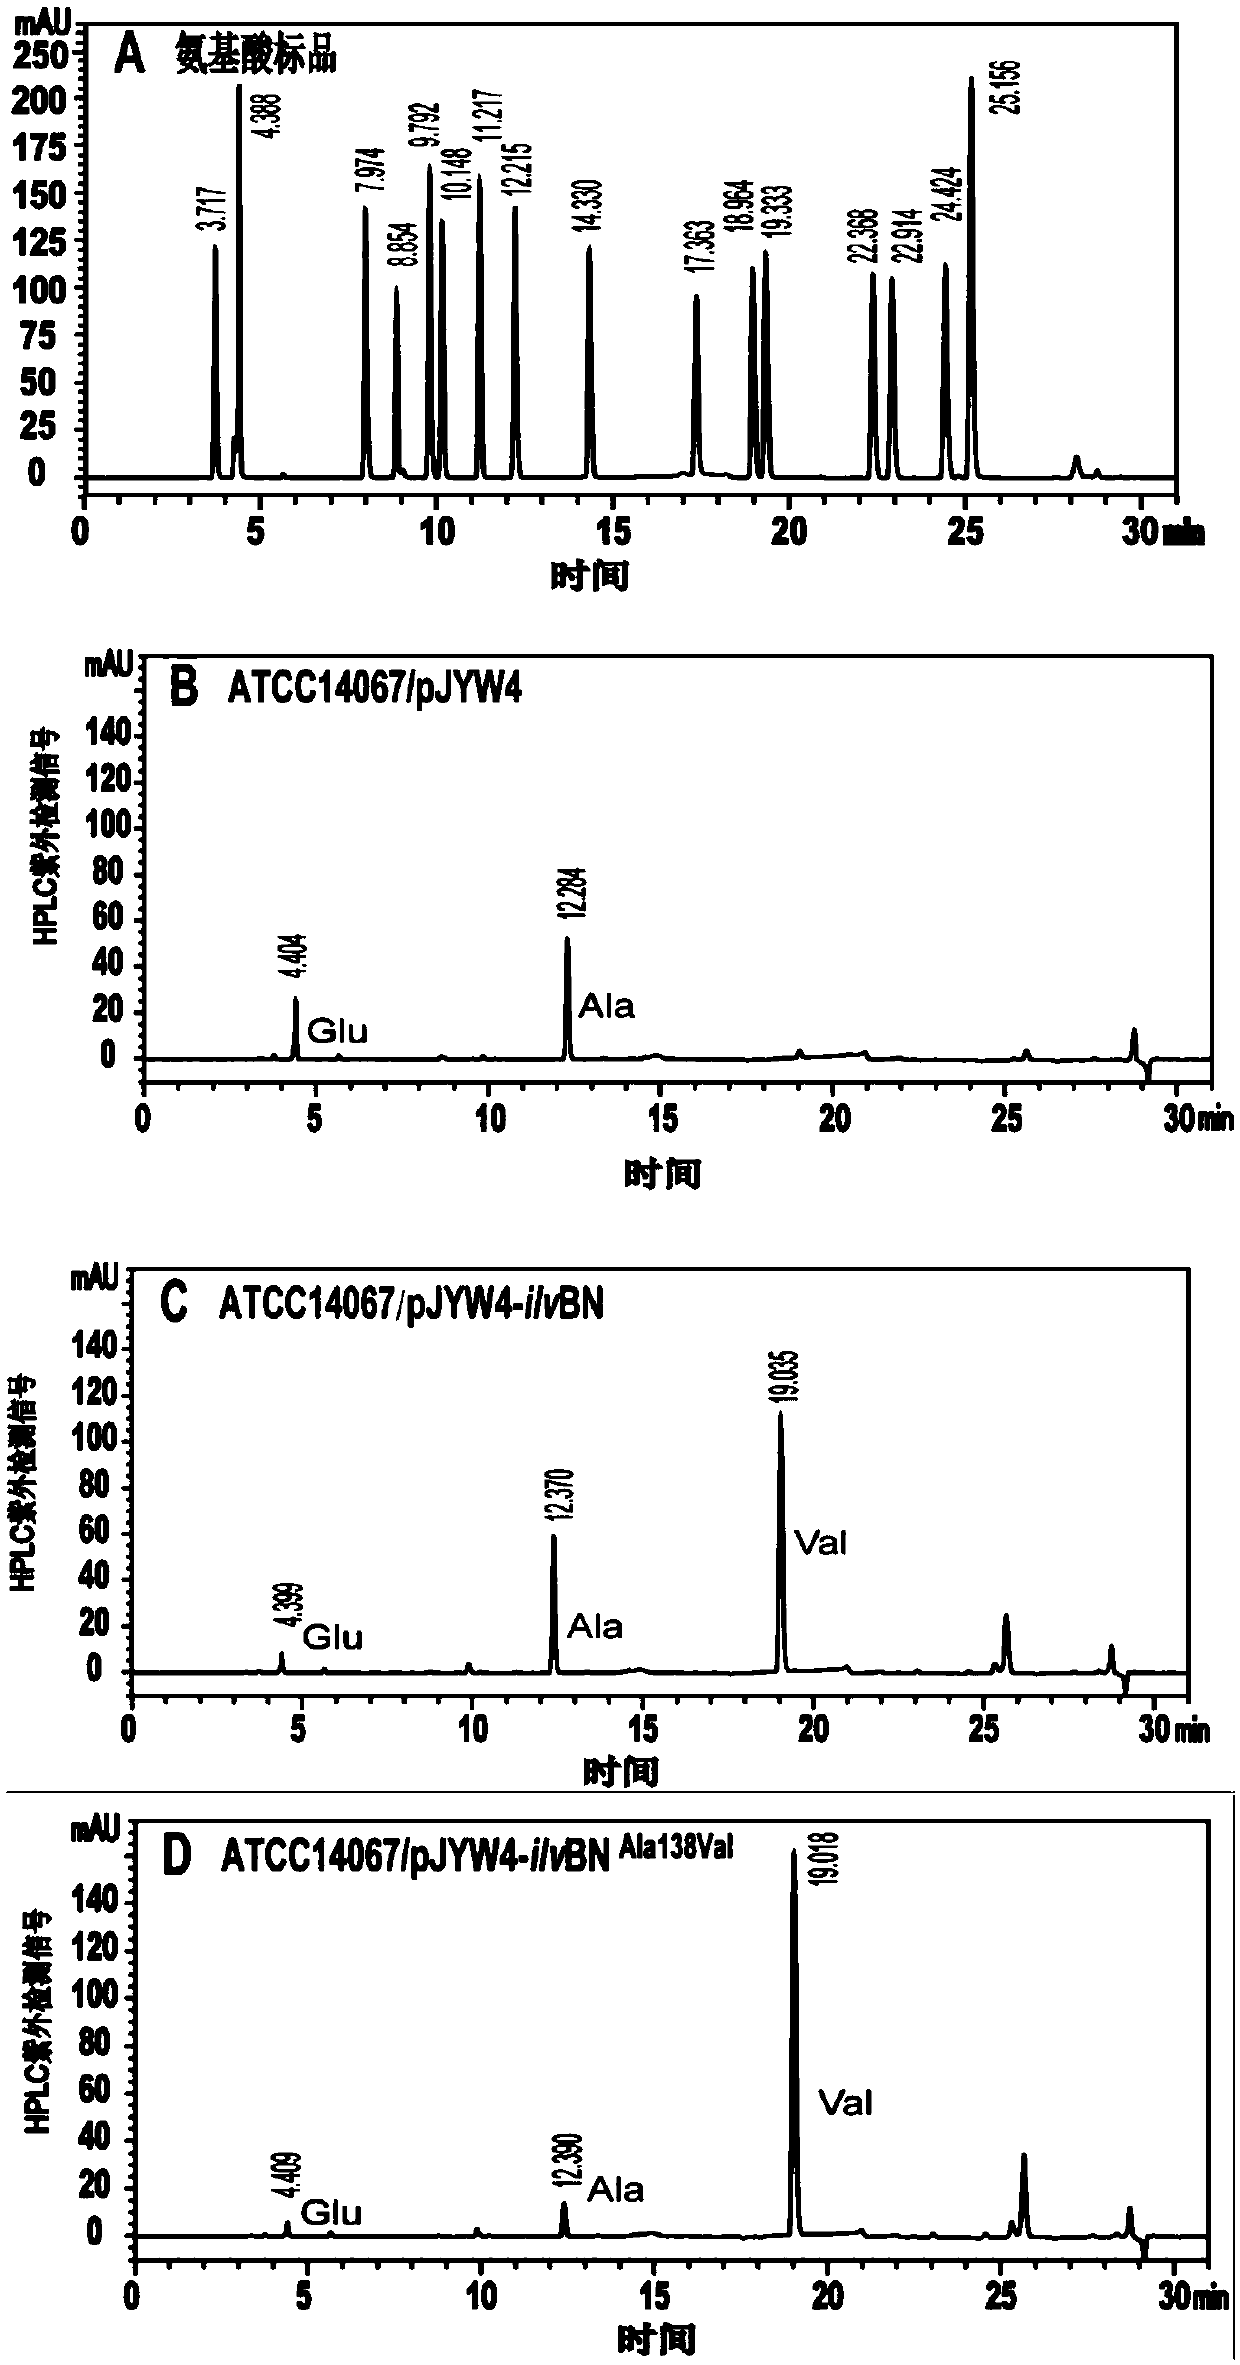 Acetohydroxyacid synthase mutant for improving L-valine synthesis efficiency